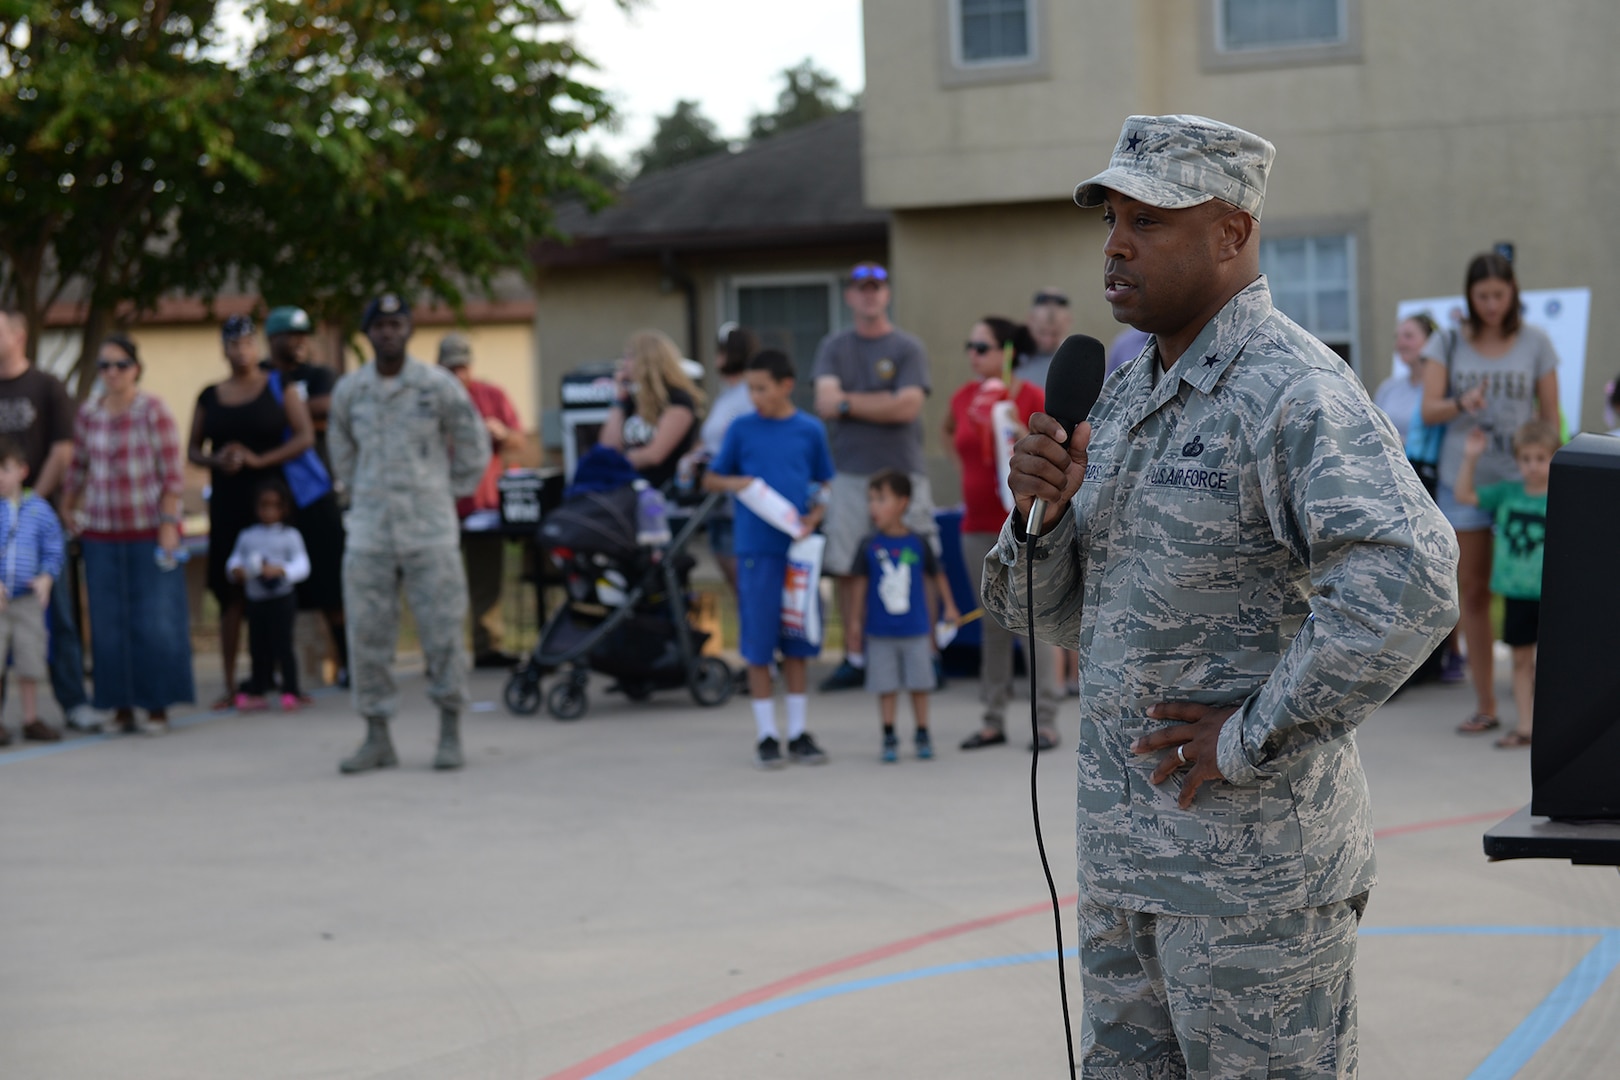 Brig. Gen. Trent Edwards, 37th Training Wing commander, provides opening remarks to start National Night Out Oct. 6, 2015, at Joint Base San Antonio-Lackland, Texas. The annual event is sponsored by the National Association of Town Watch, which is a non-profit crime prevention organization. (U.S. Air Force photo by Senior Airman Krystal Wright/Released)